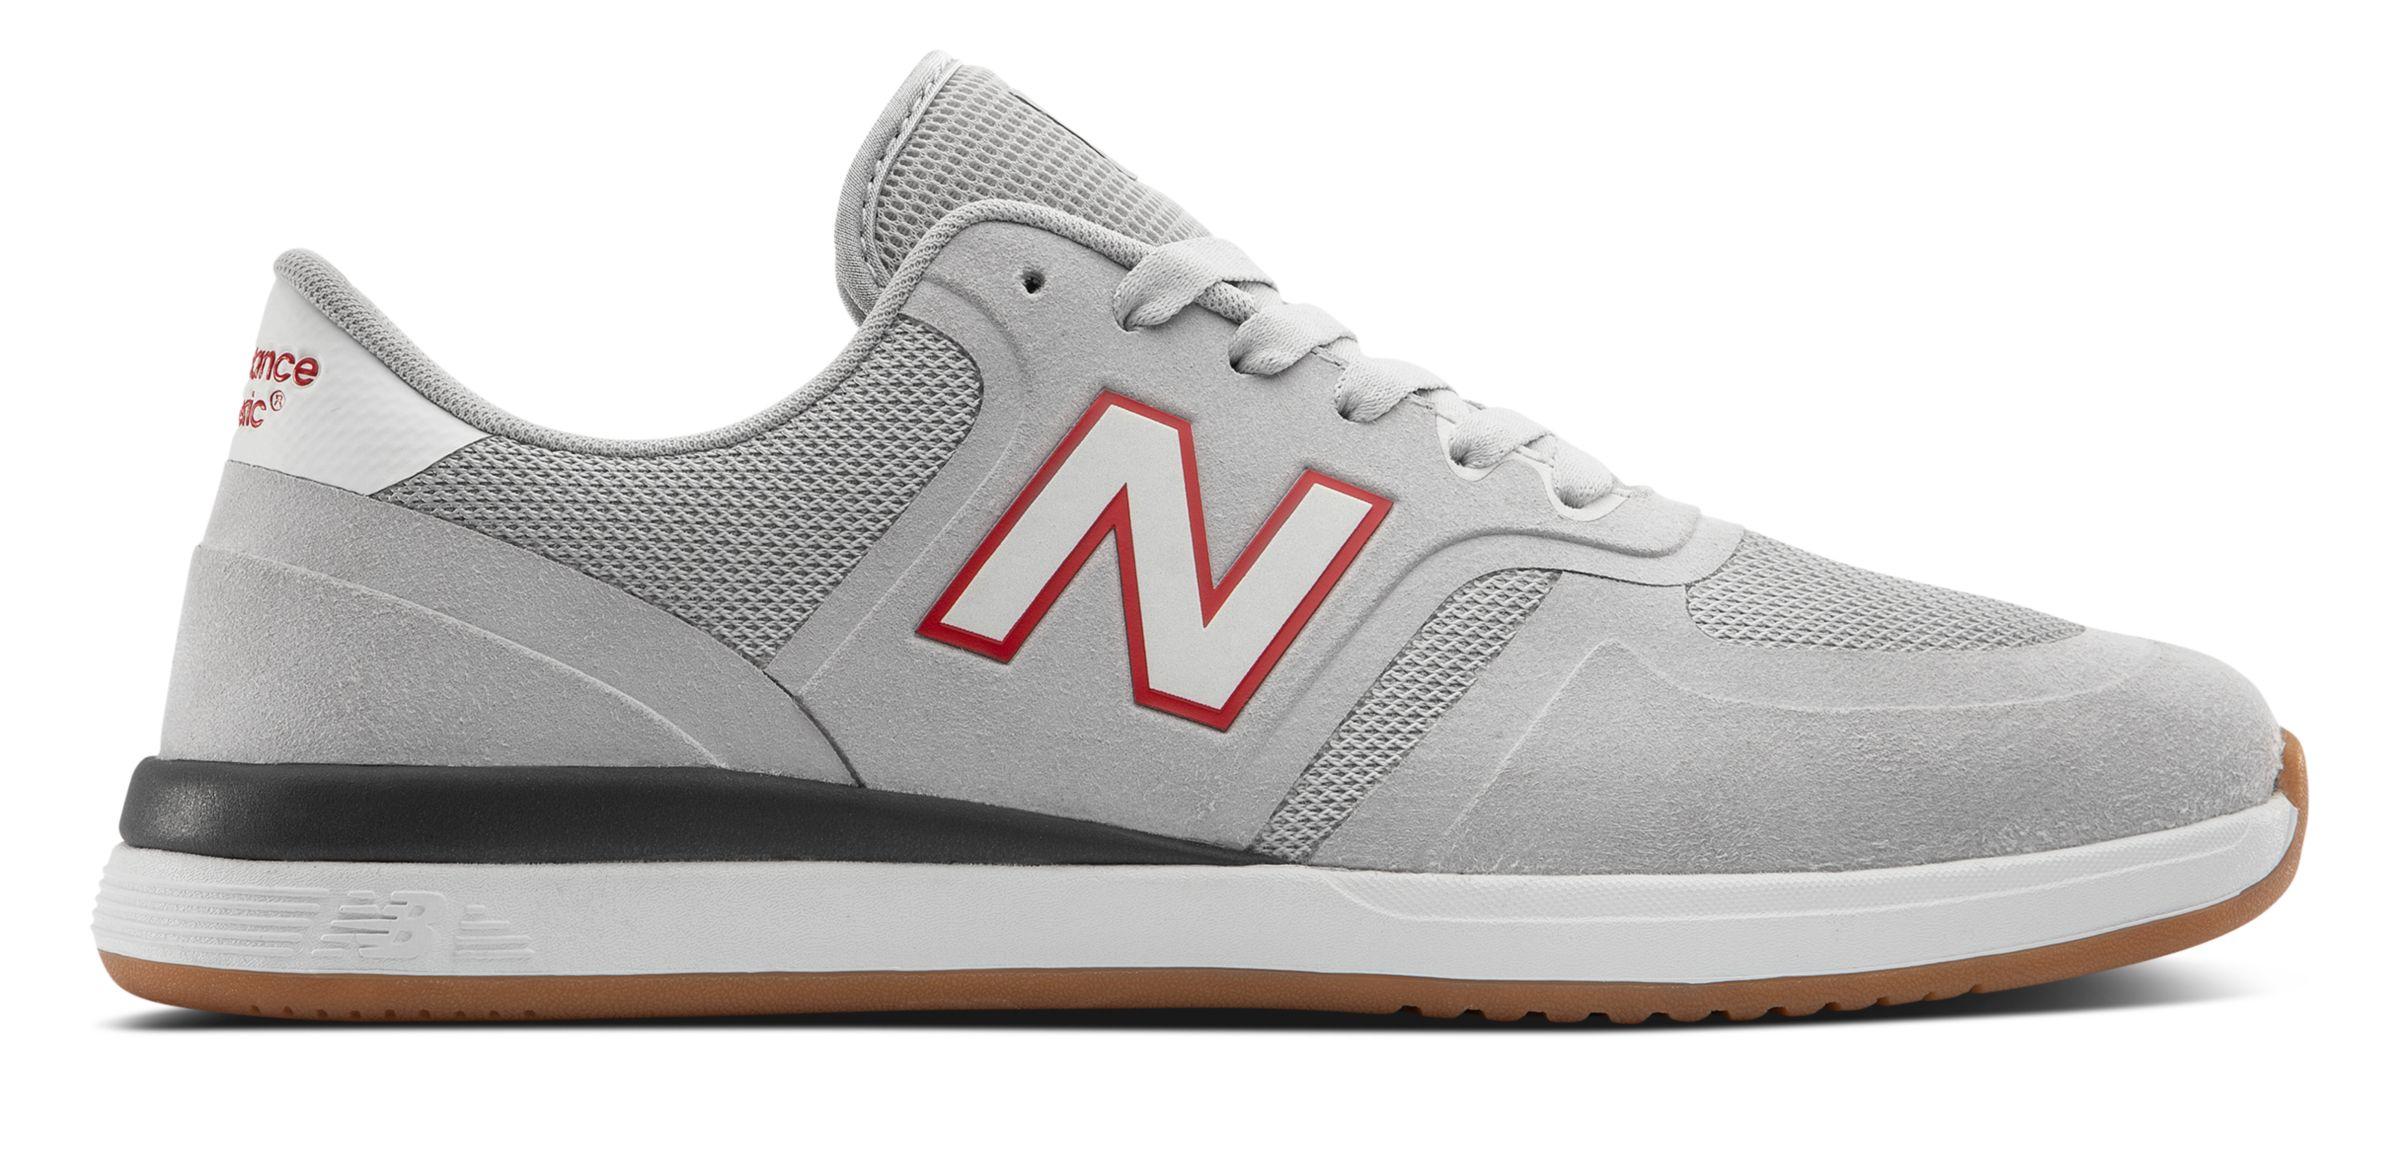 New Balance Numeric 420 Numeric Shoes in Grey/White (Gray) for Men - Lyst